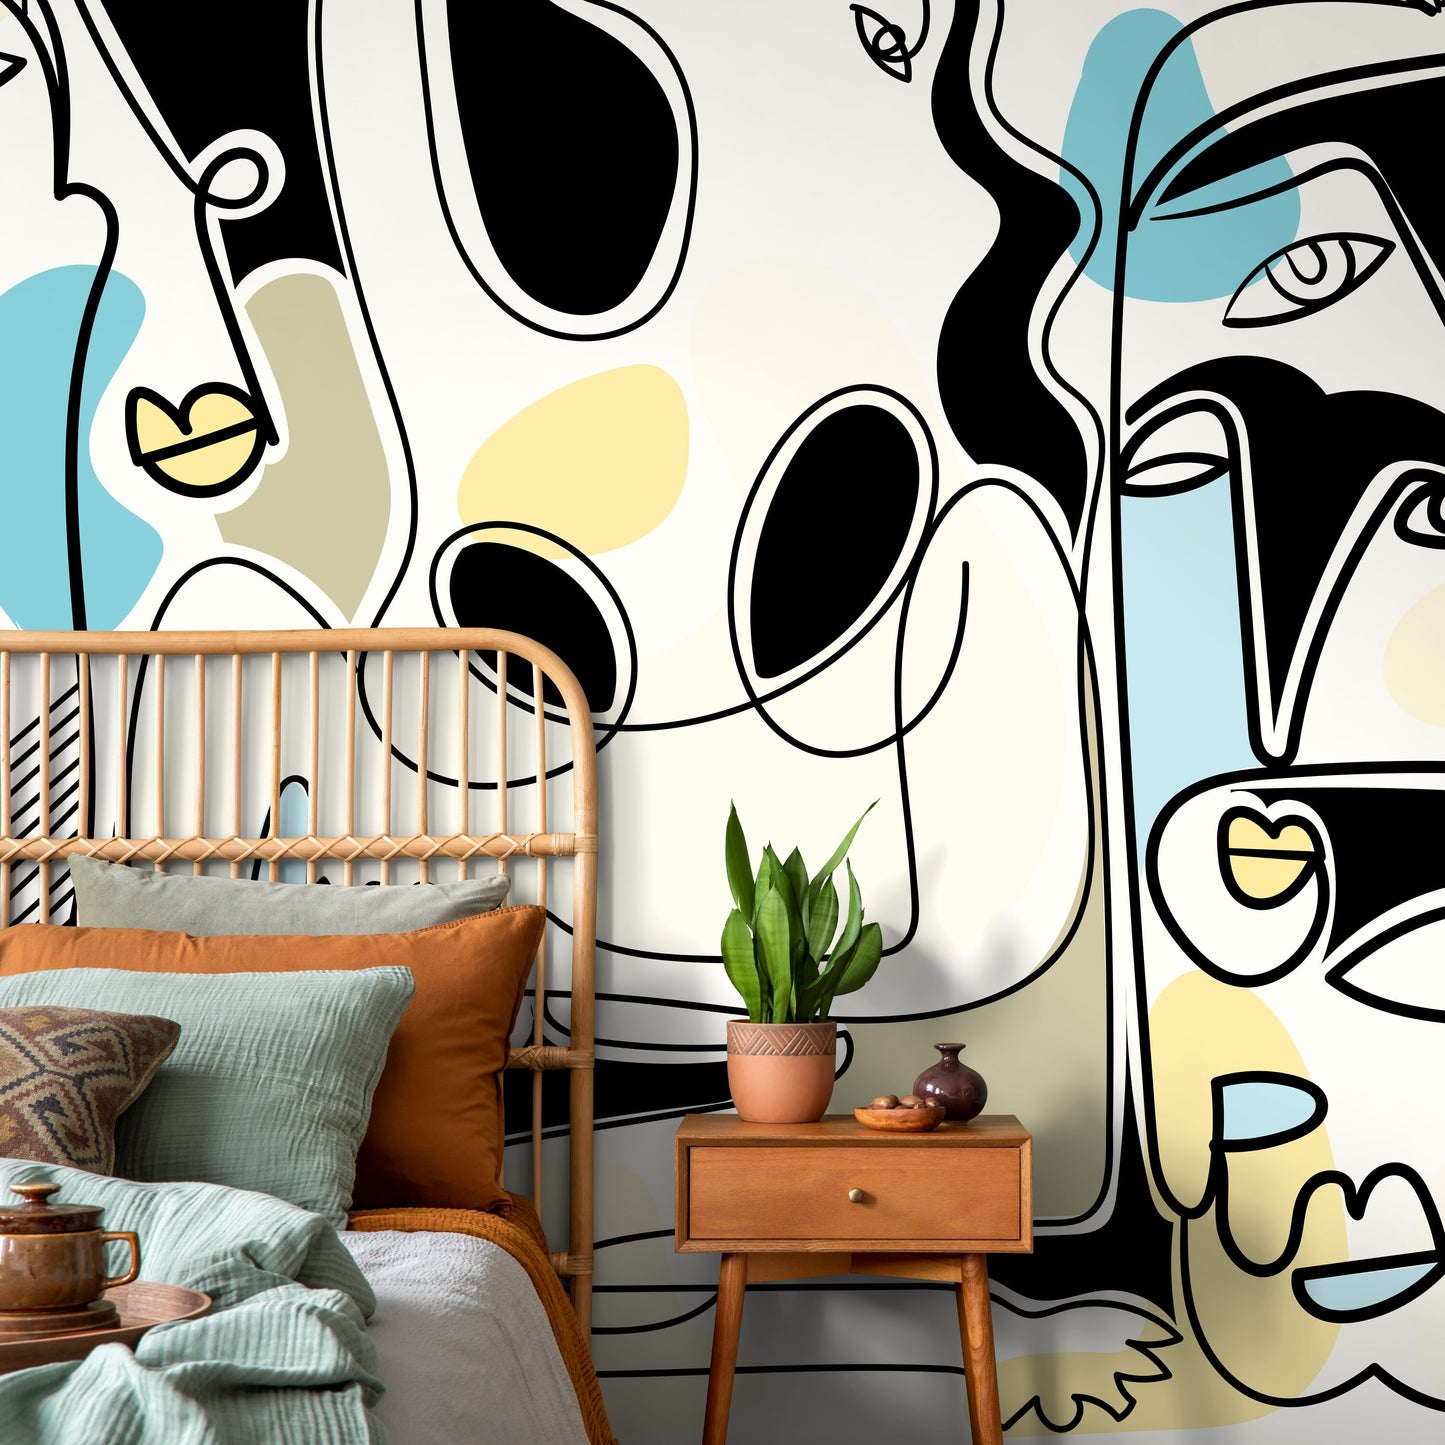 Line Art Faces Mural Abstract Wallpaper Hand Drawing Wallpaper Peel and Stick Wallpaper Home Decor - D591